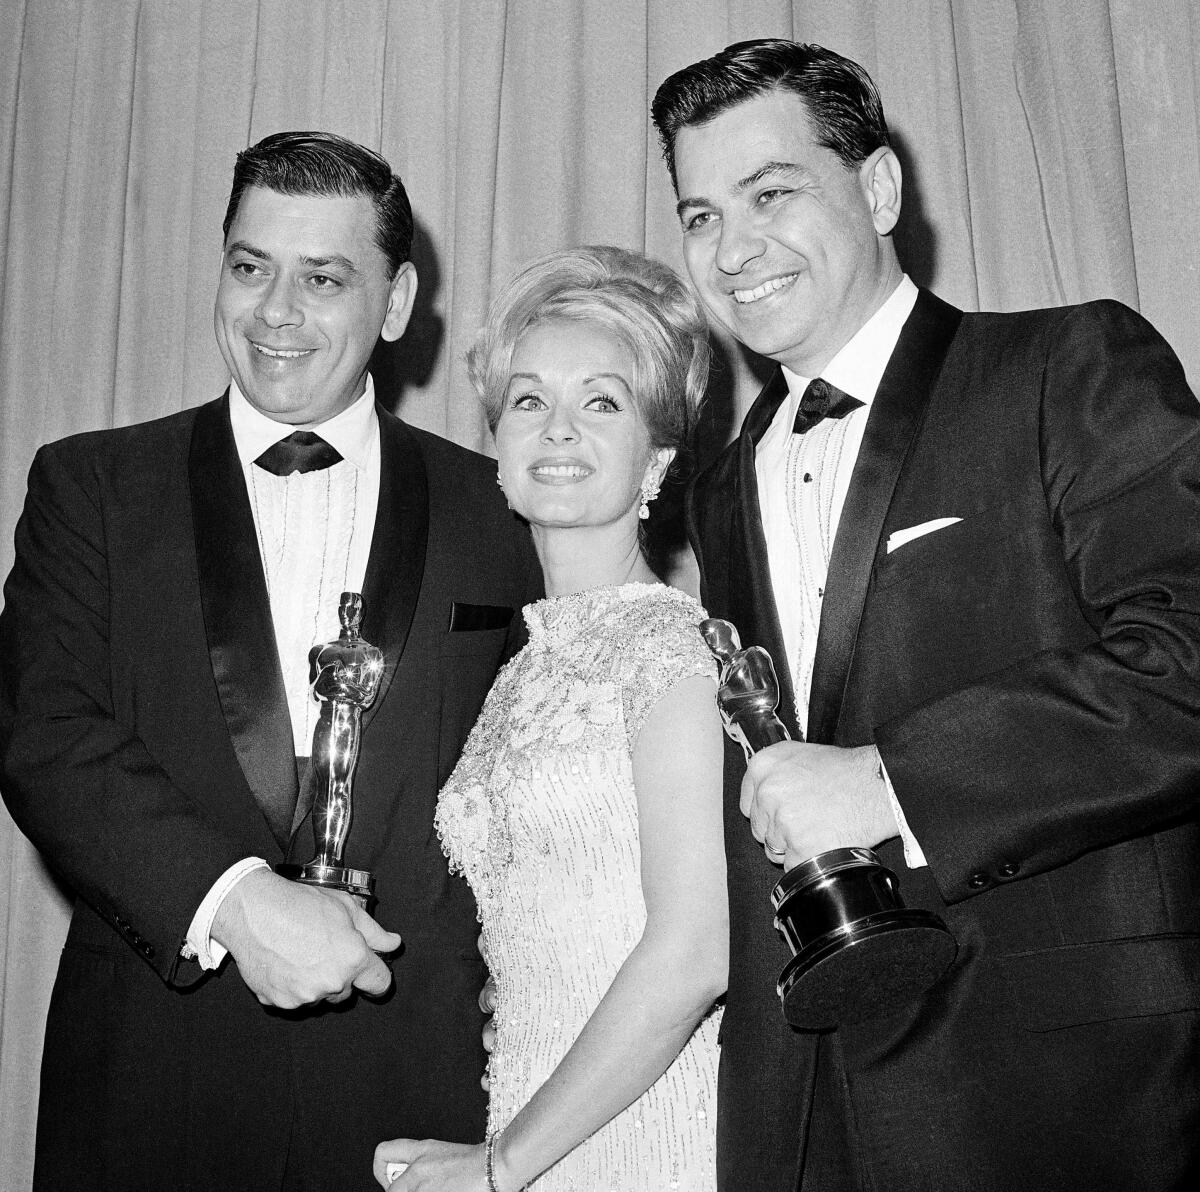 Debbie Reynolds stands between two men in tuxedoes holding Oscar statuettes